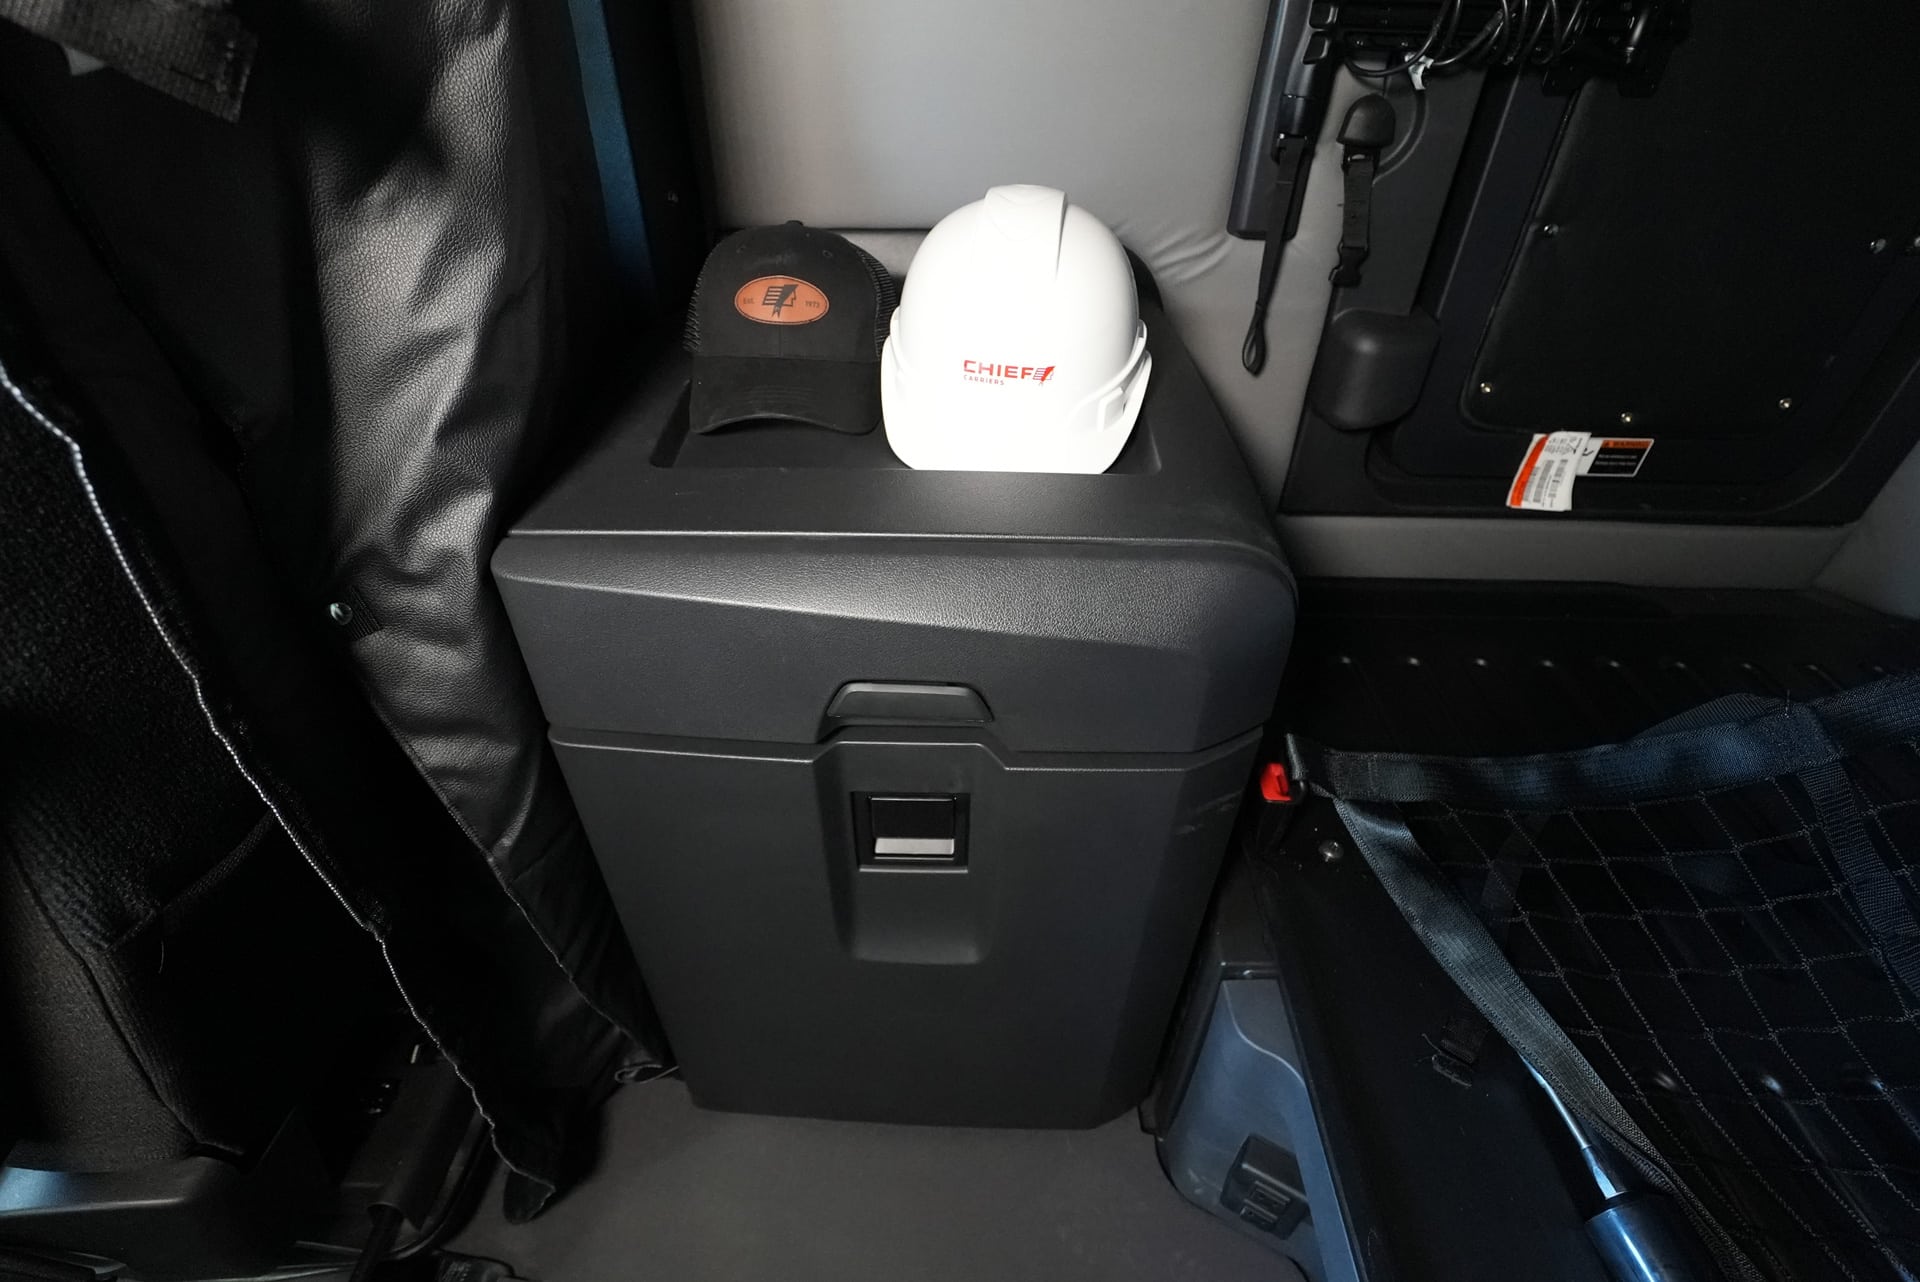 chief carriers hard had and baseball hat inside a freightliner